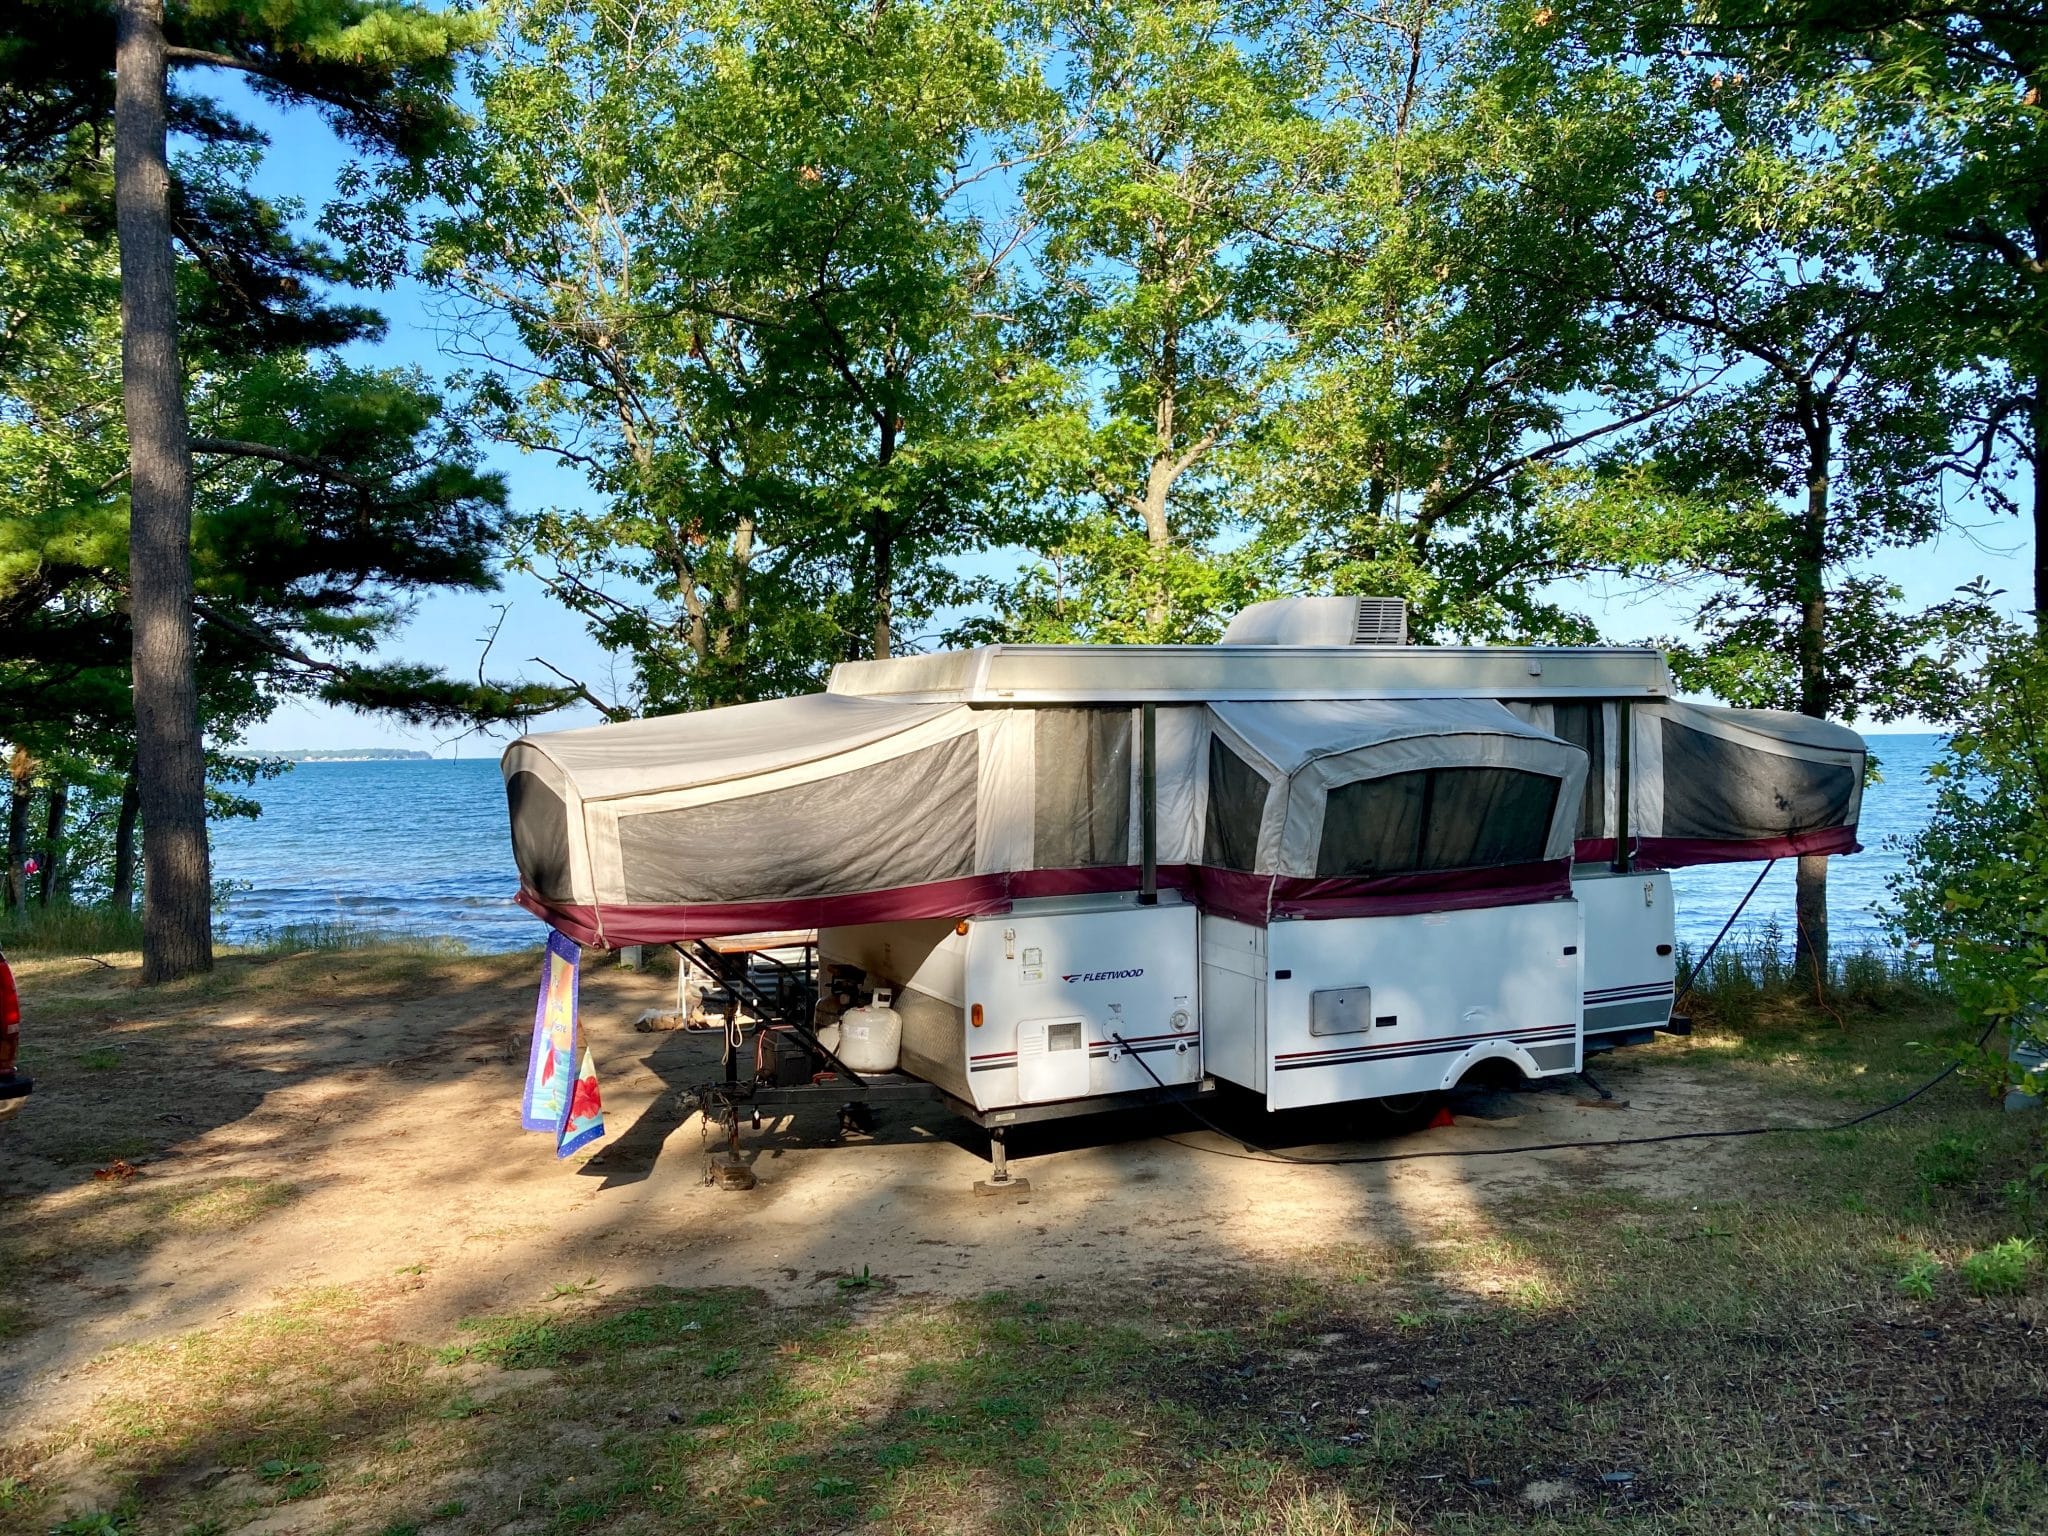 Lakeside camp site at Port Crescent State Park